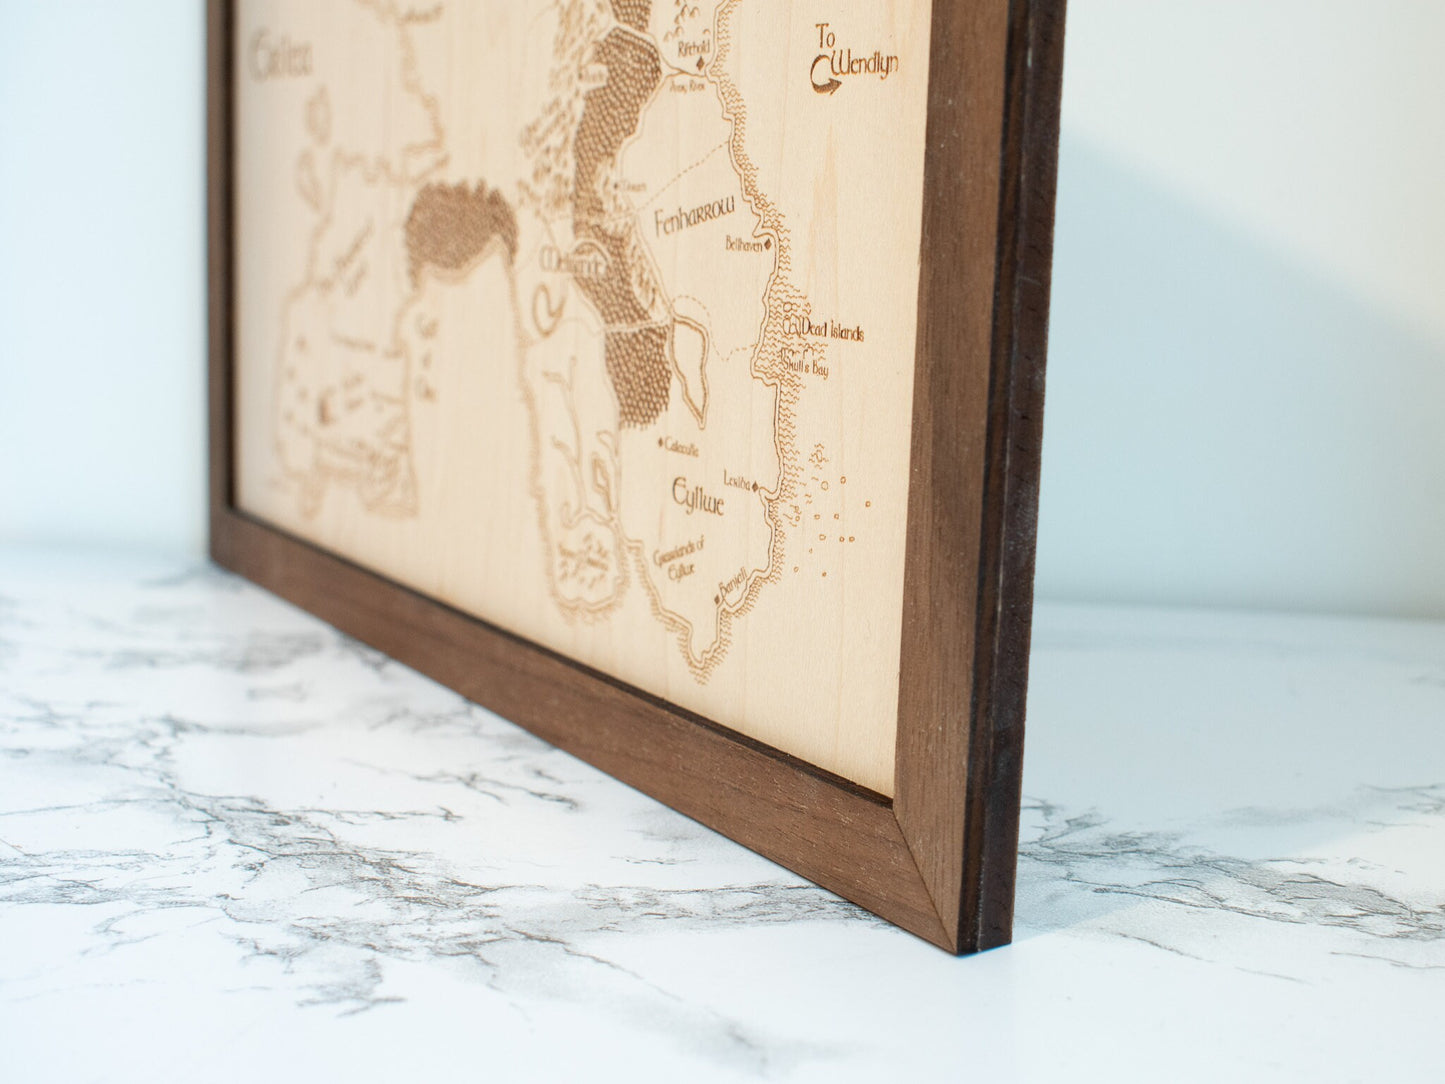 Throne of Glass Map, Wood Engraved Map of Erilea